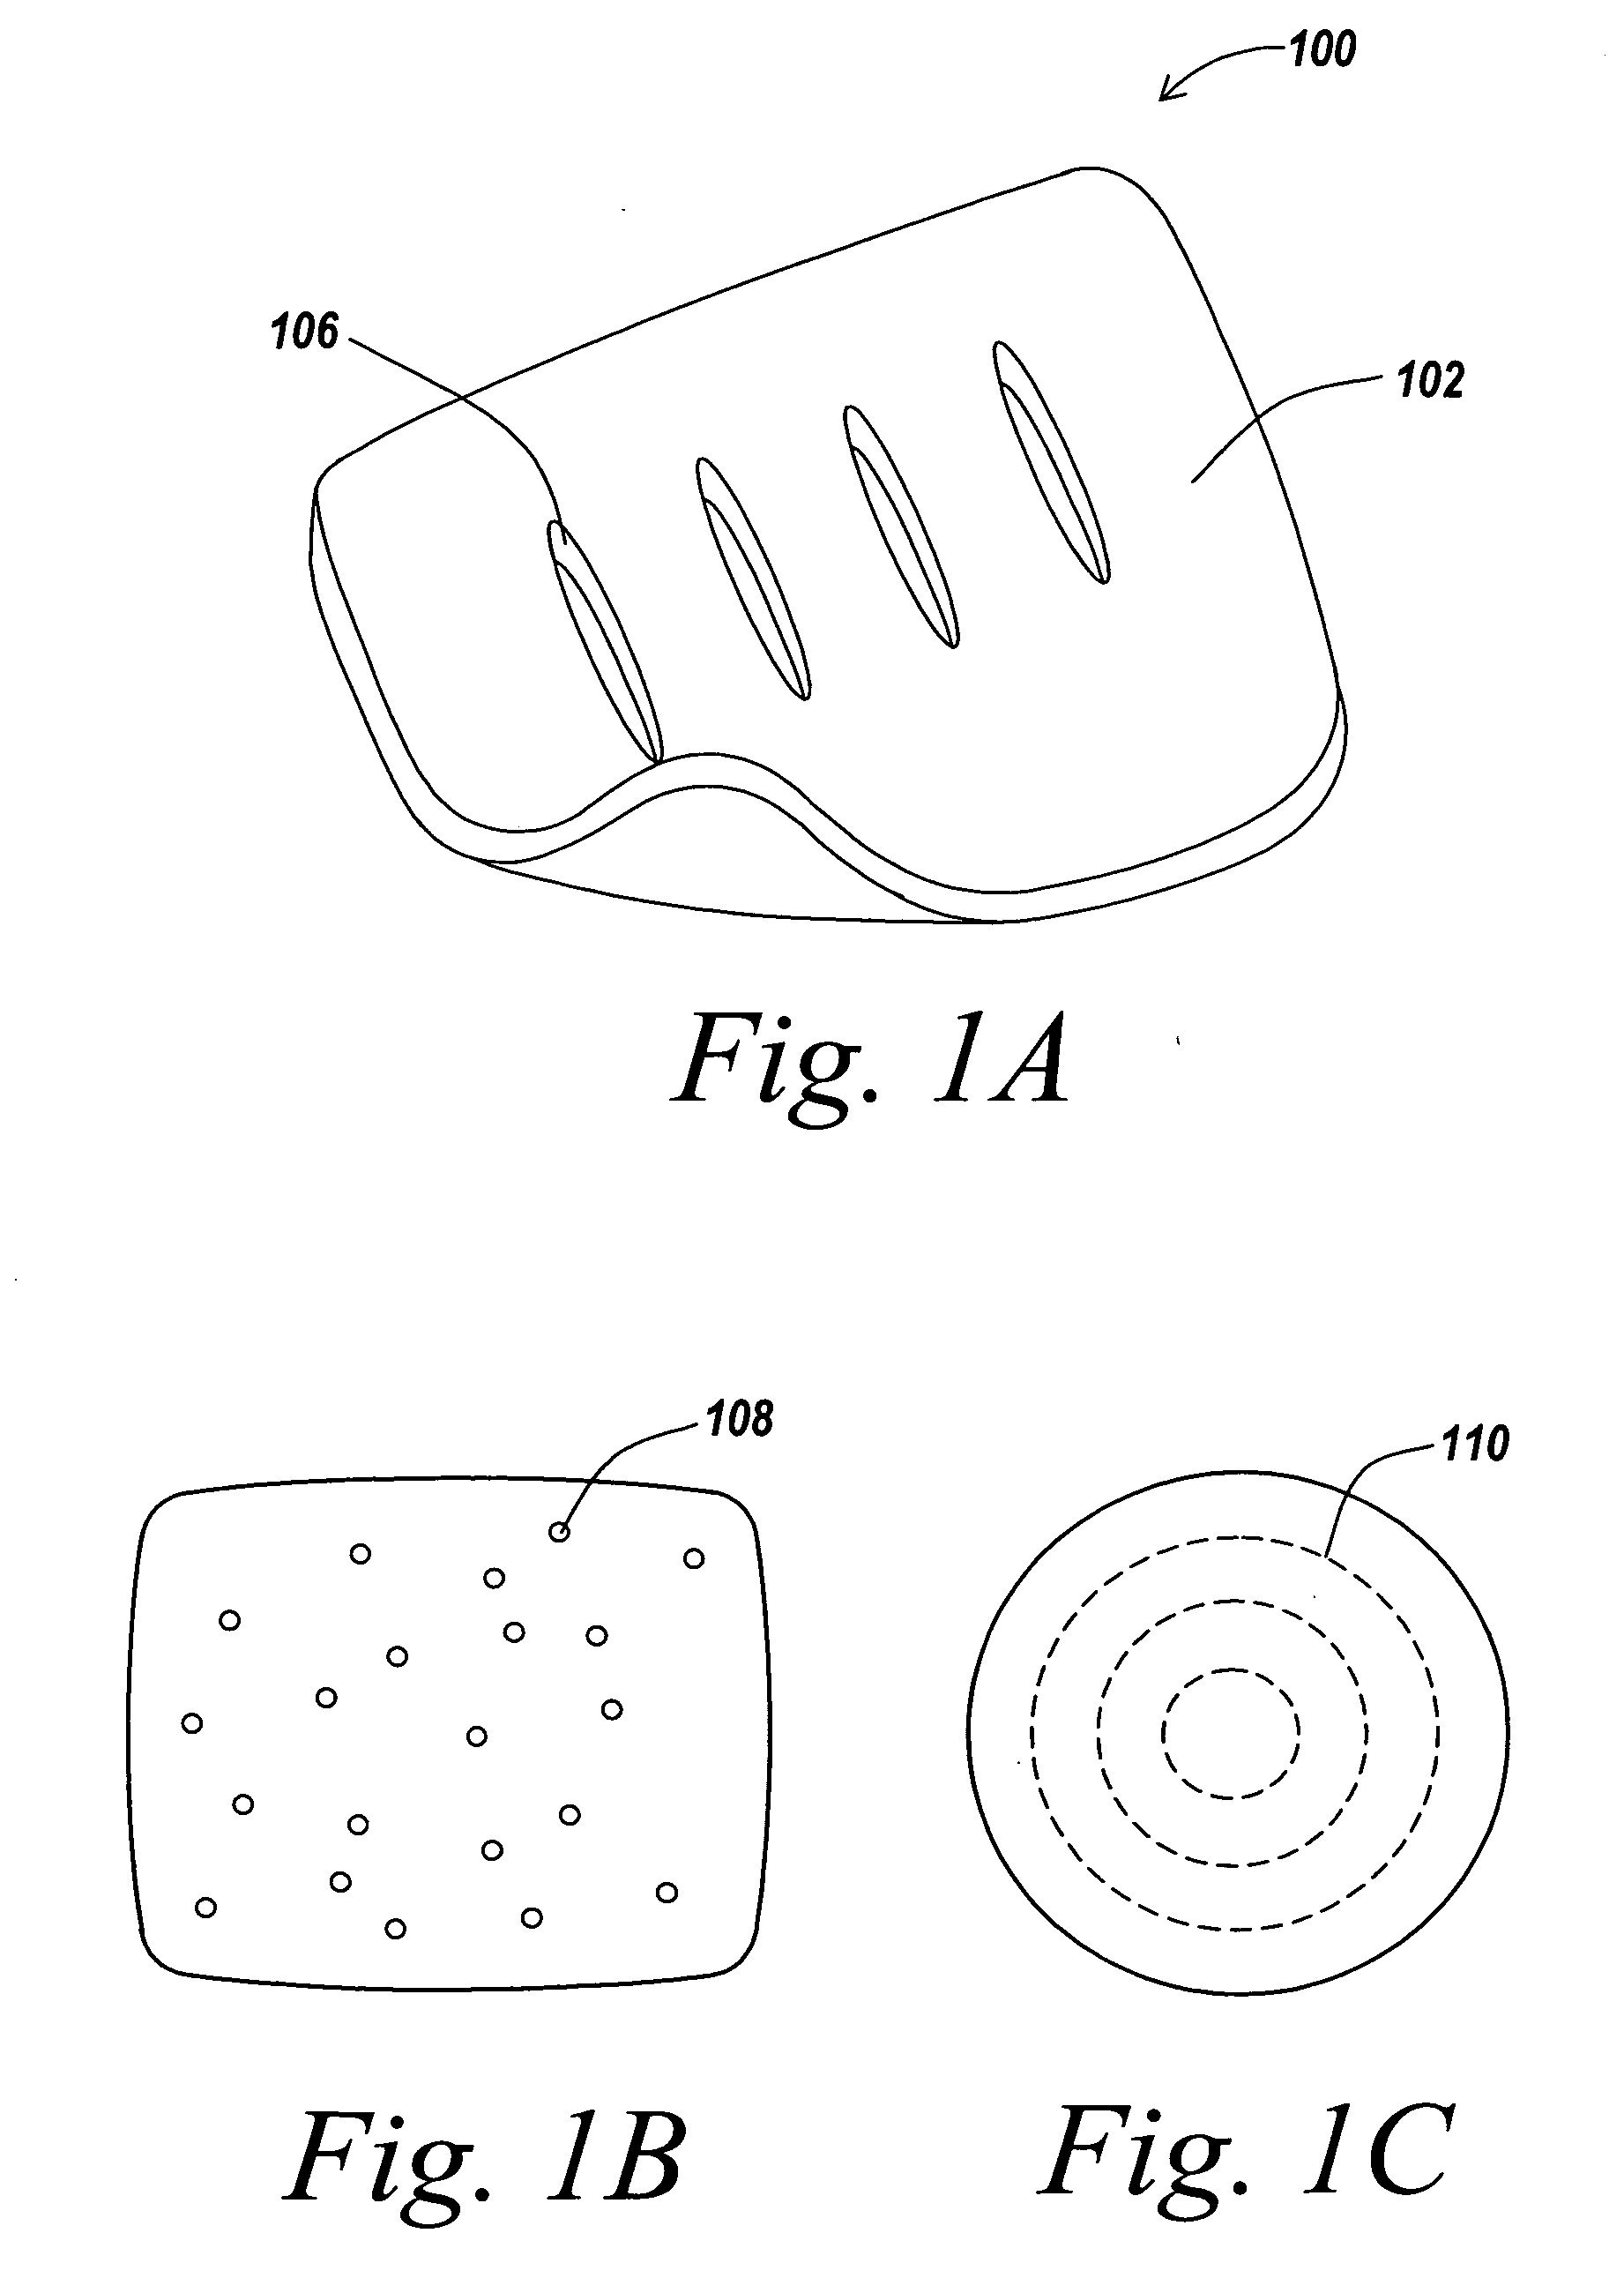 Perforated bioabsorbable oil film and methods for making the same